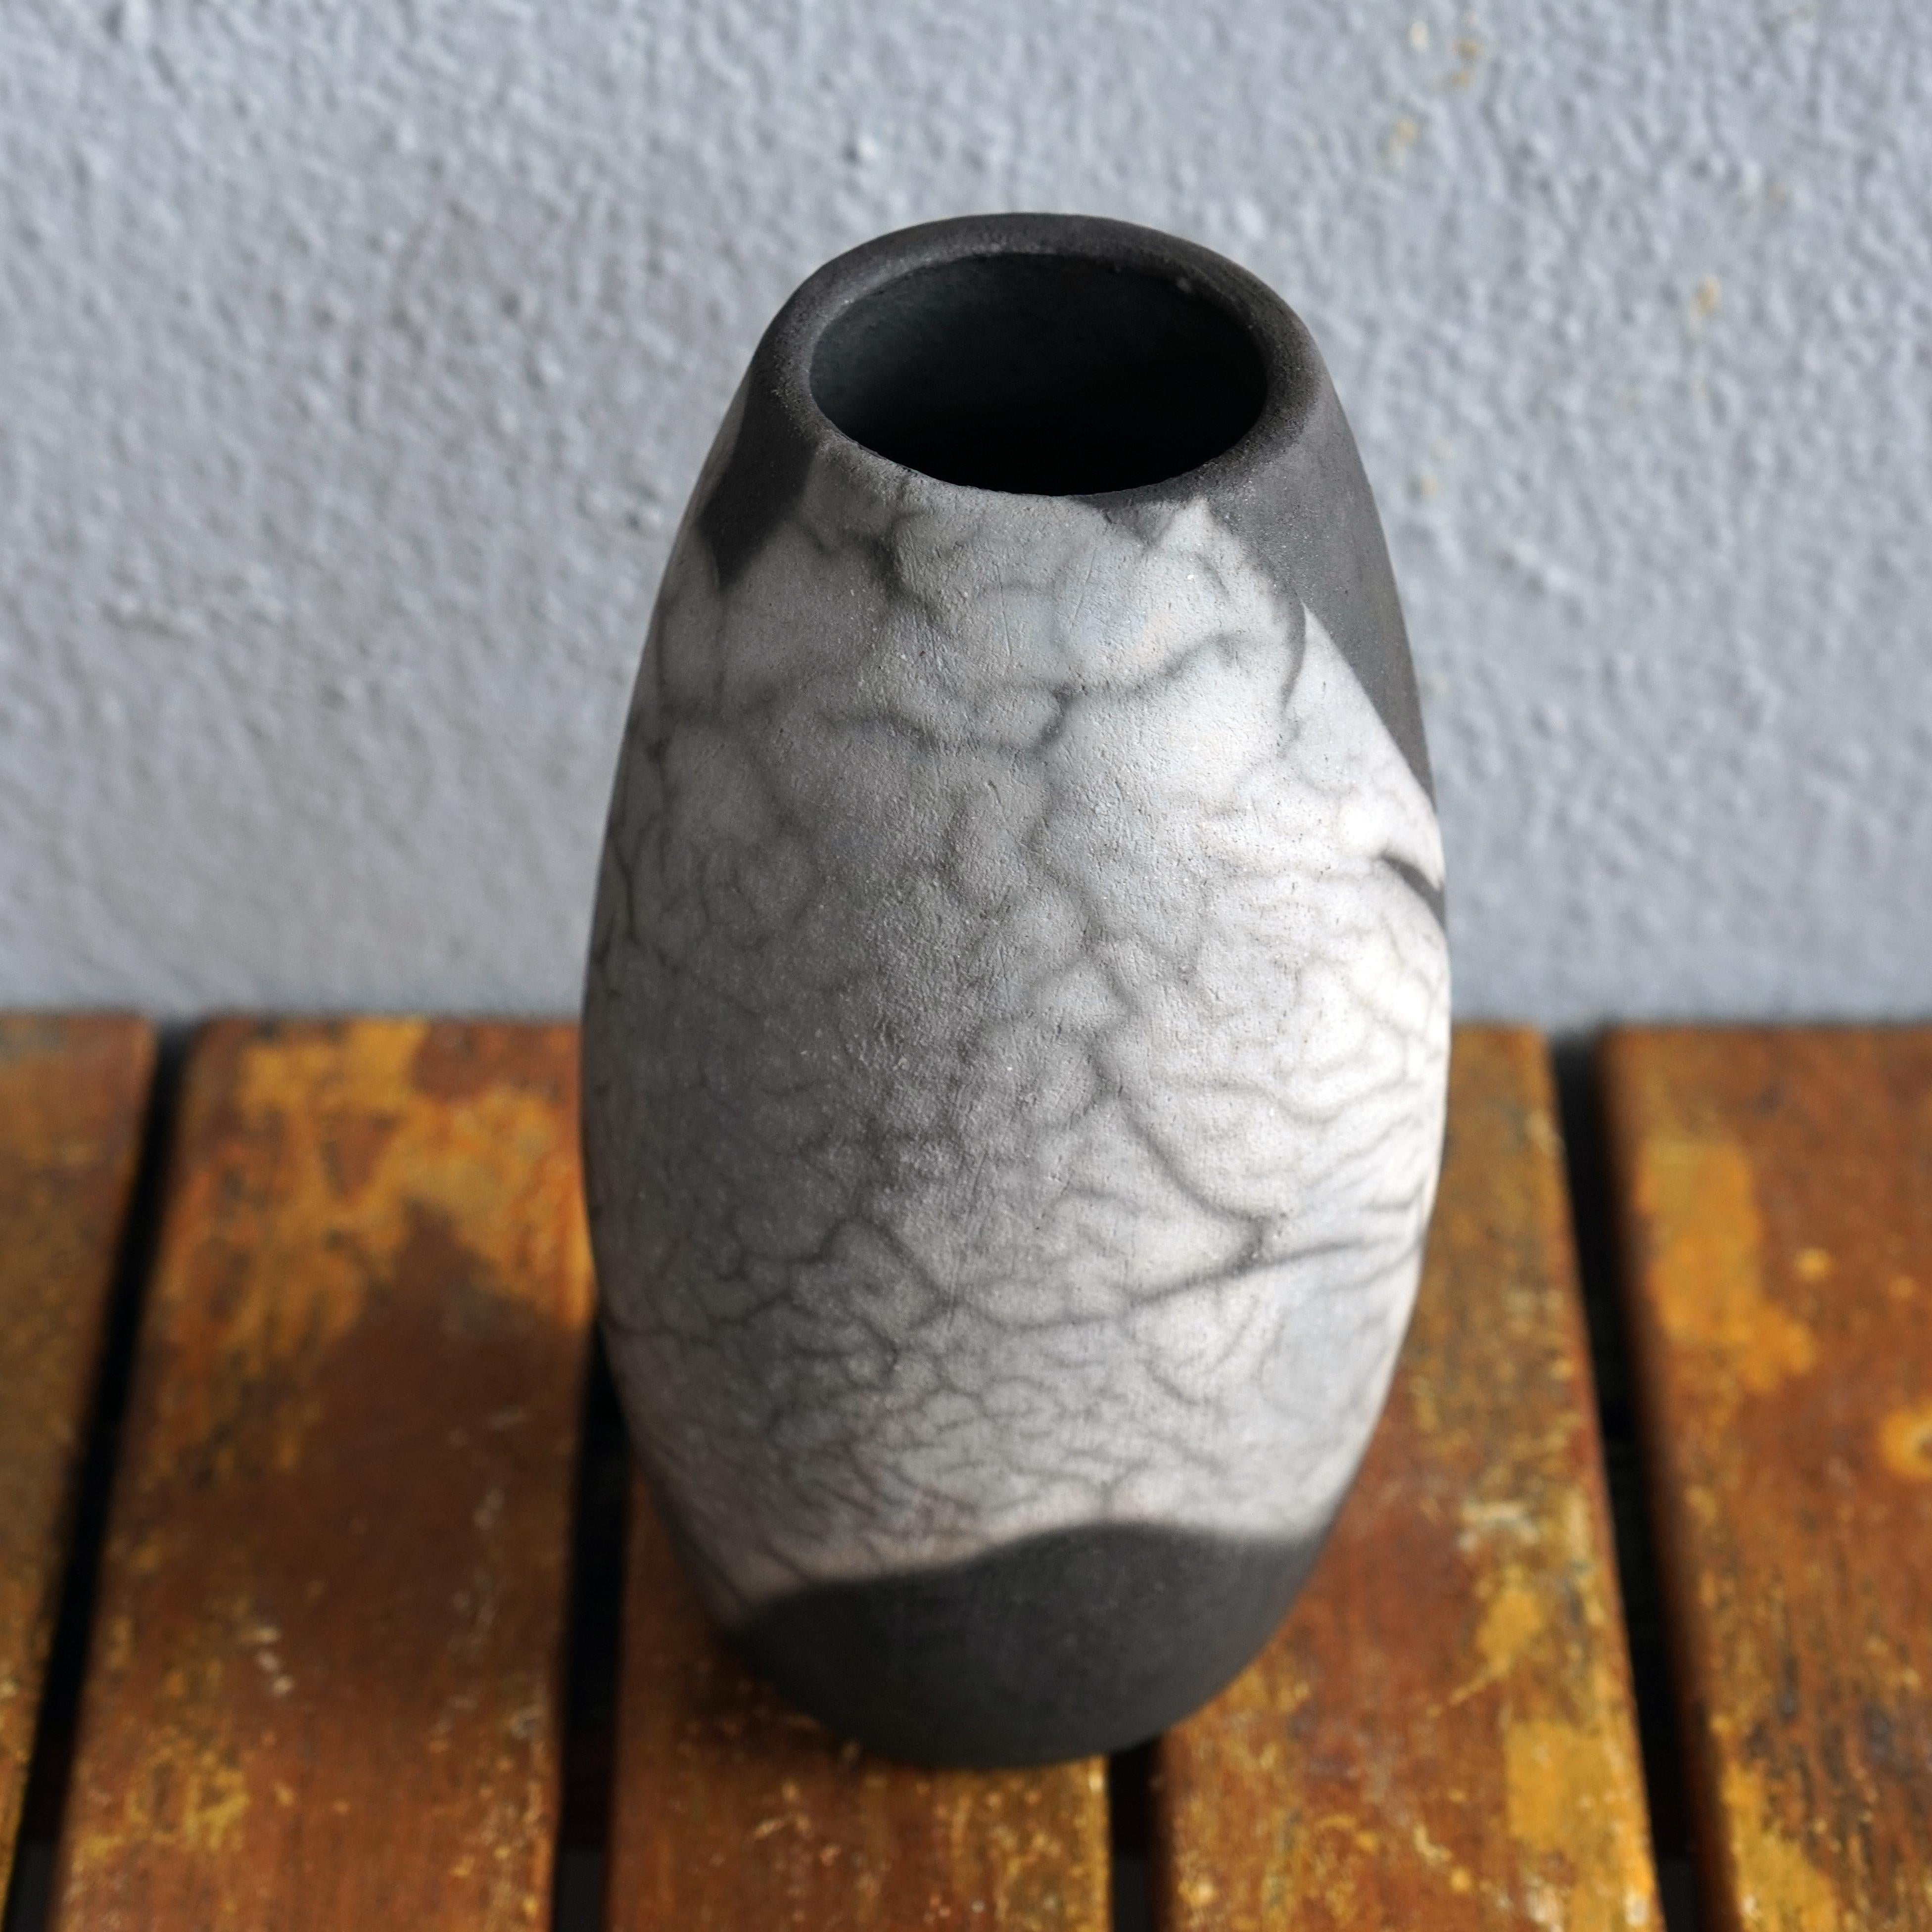 Tsuri ( ツリー ) ~ (n) Tree

Our Tsuri vase is based on the classic bottle shape but with a wider mouth at the top. It would definitely look great when put together with other RAAQUU BASICS vases.

You could decorate your space with the Tsuri vase as